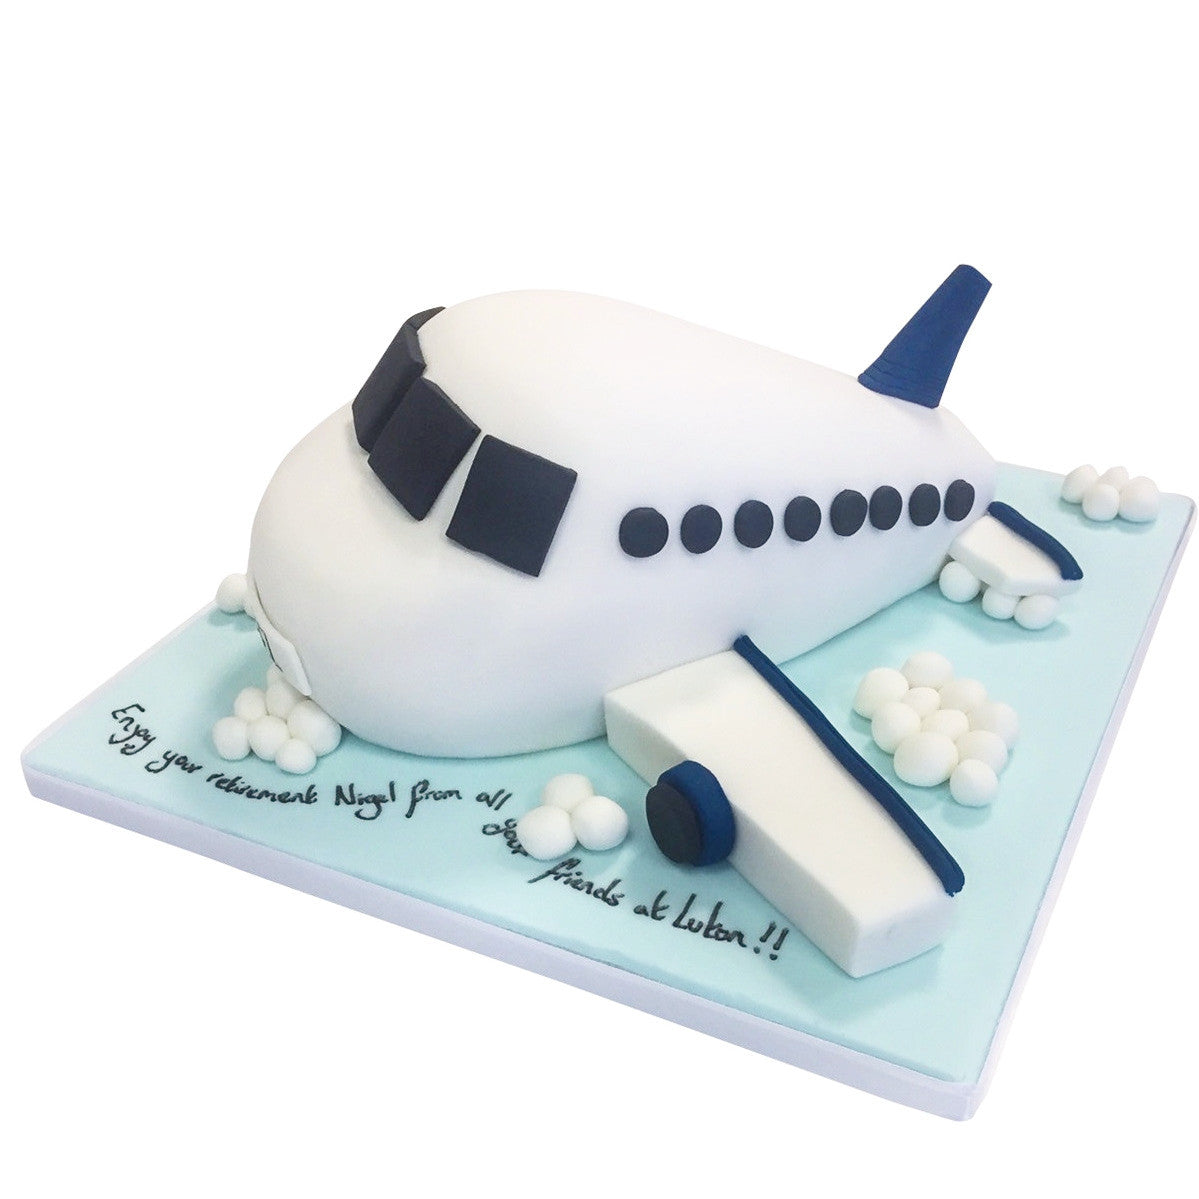 Airplane Chocolate Unique Handmade Cake Topper Decoration or - Etsy